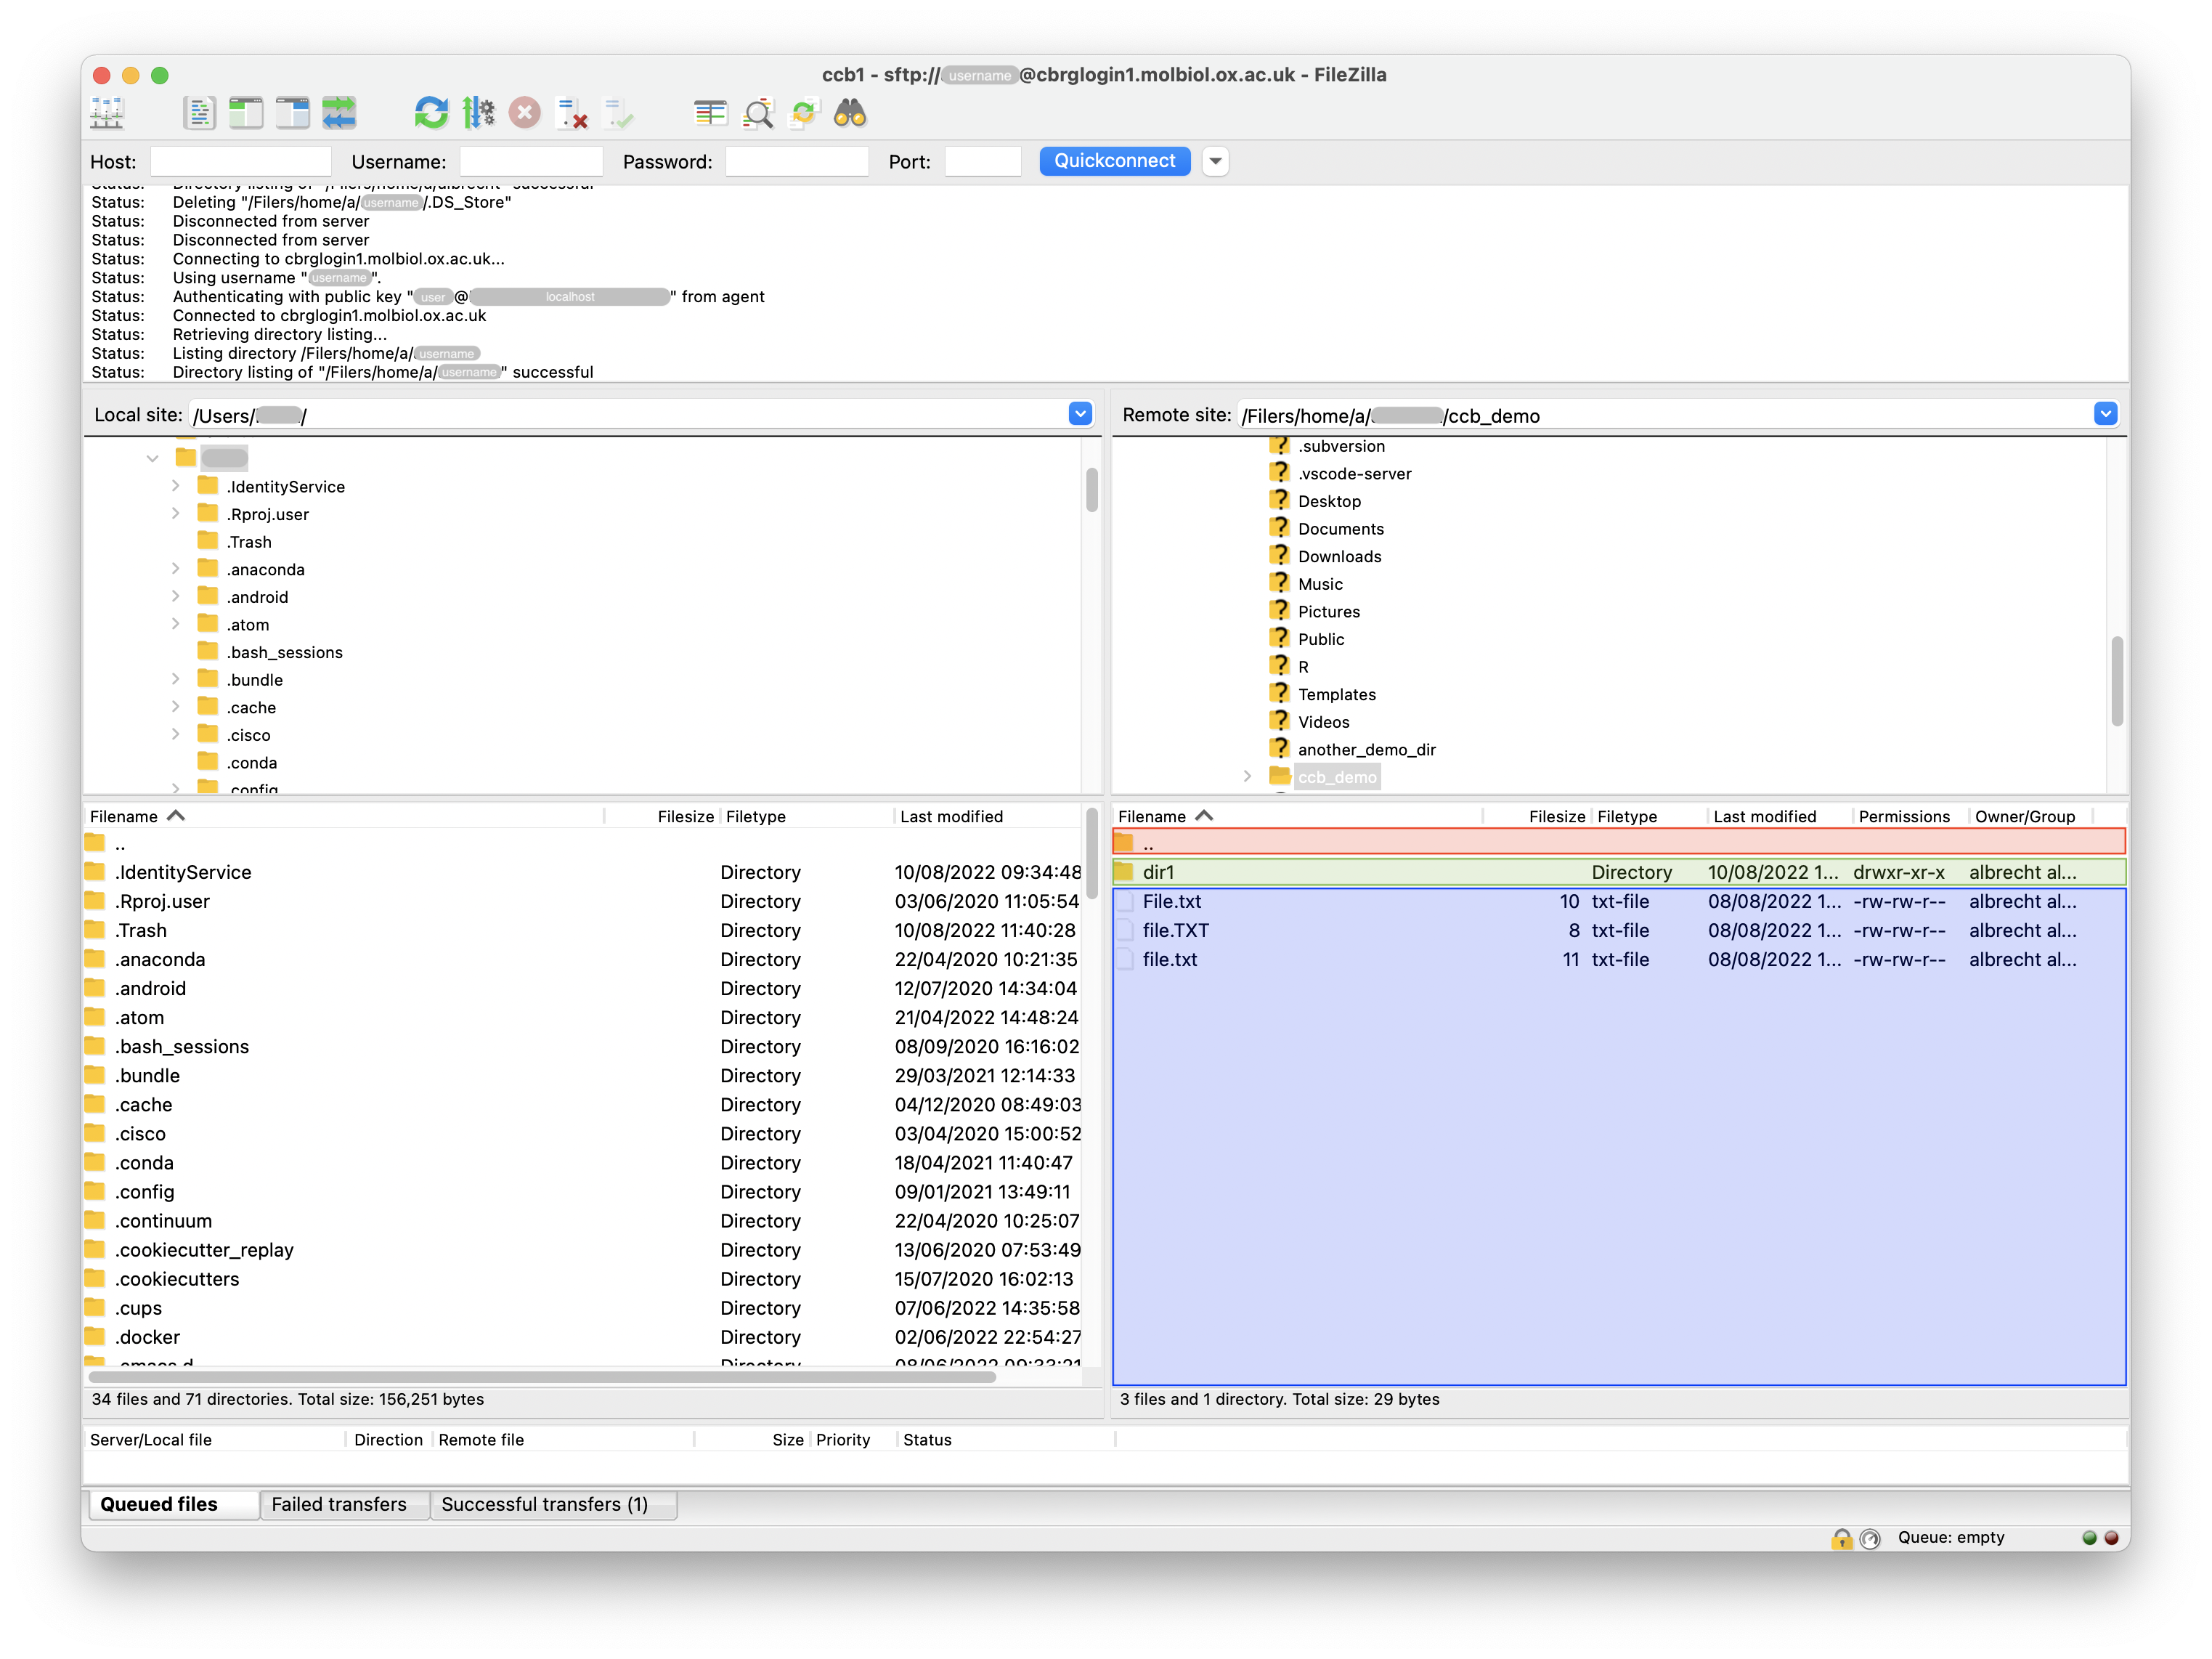 Example view of the FileZilla Client (main window).